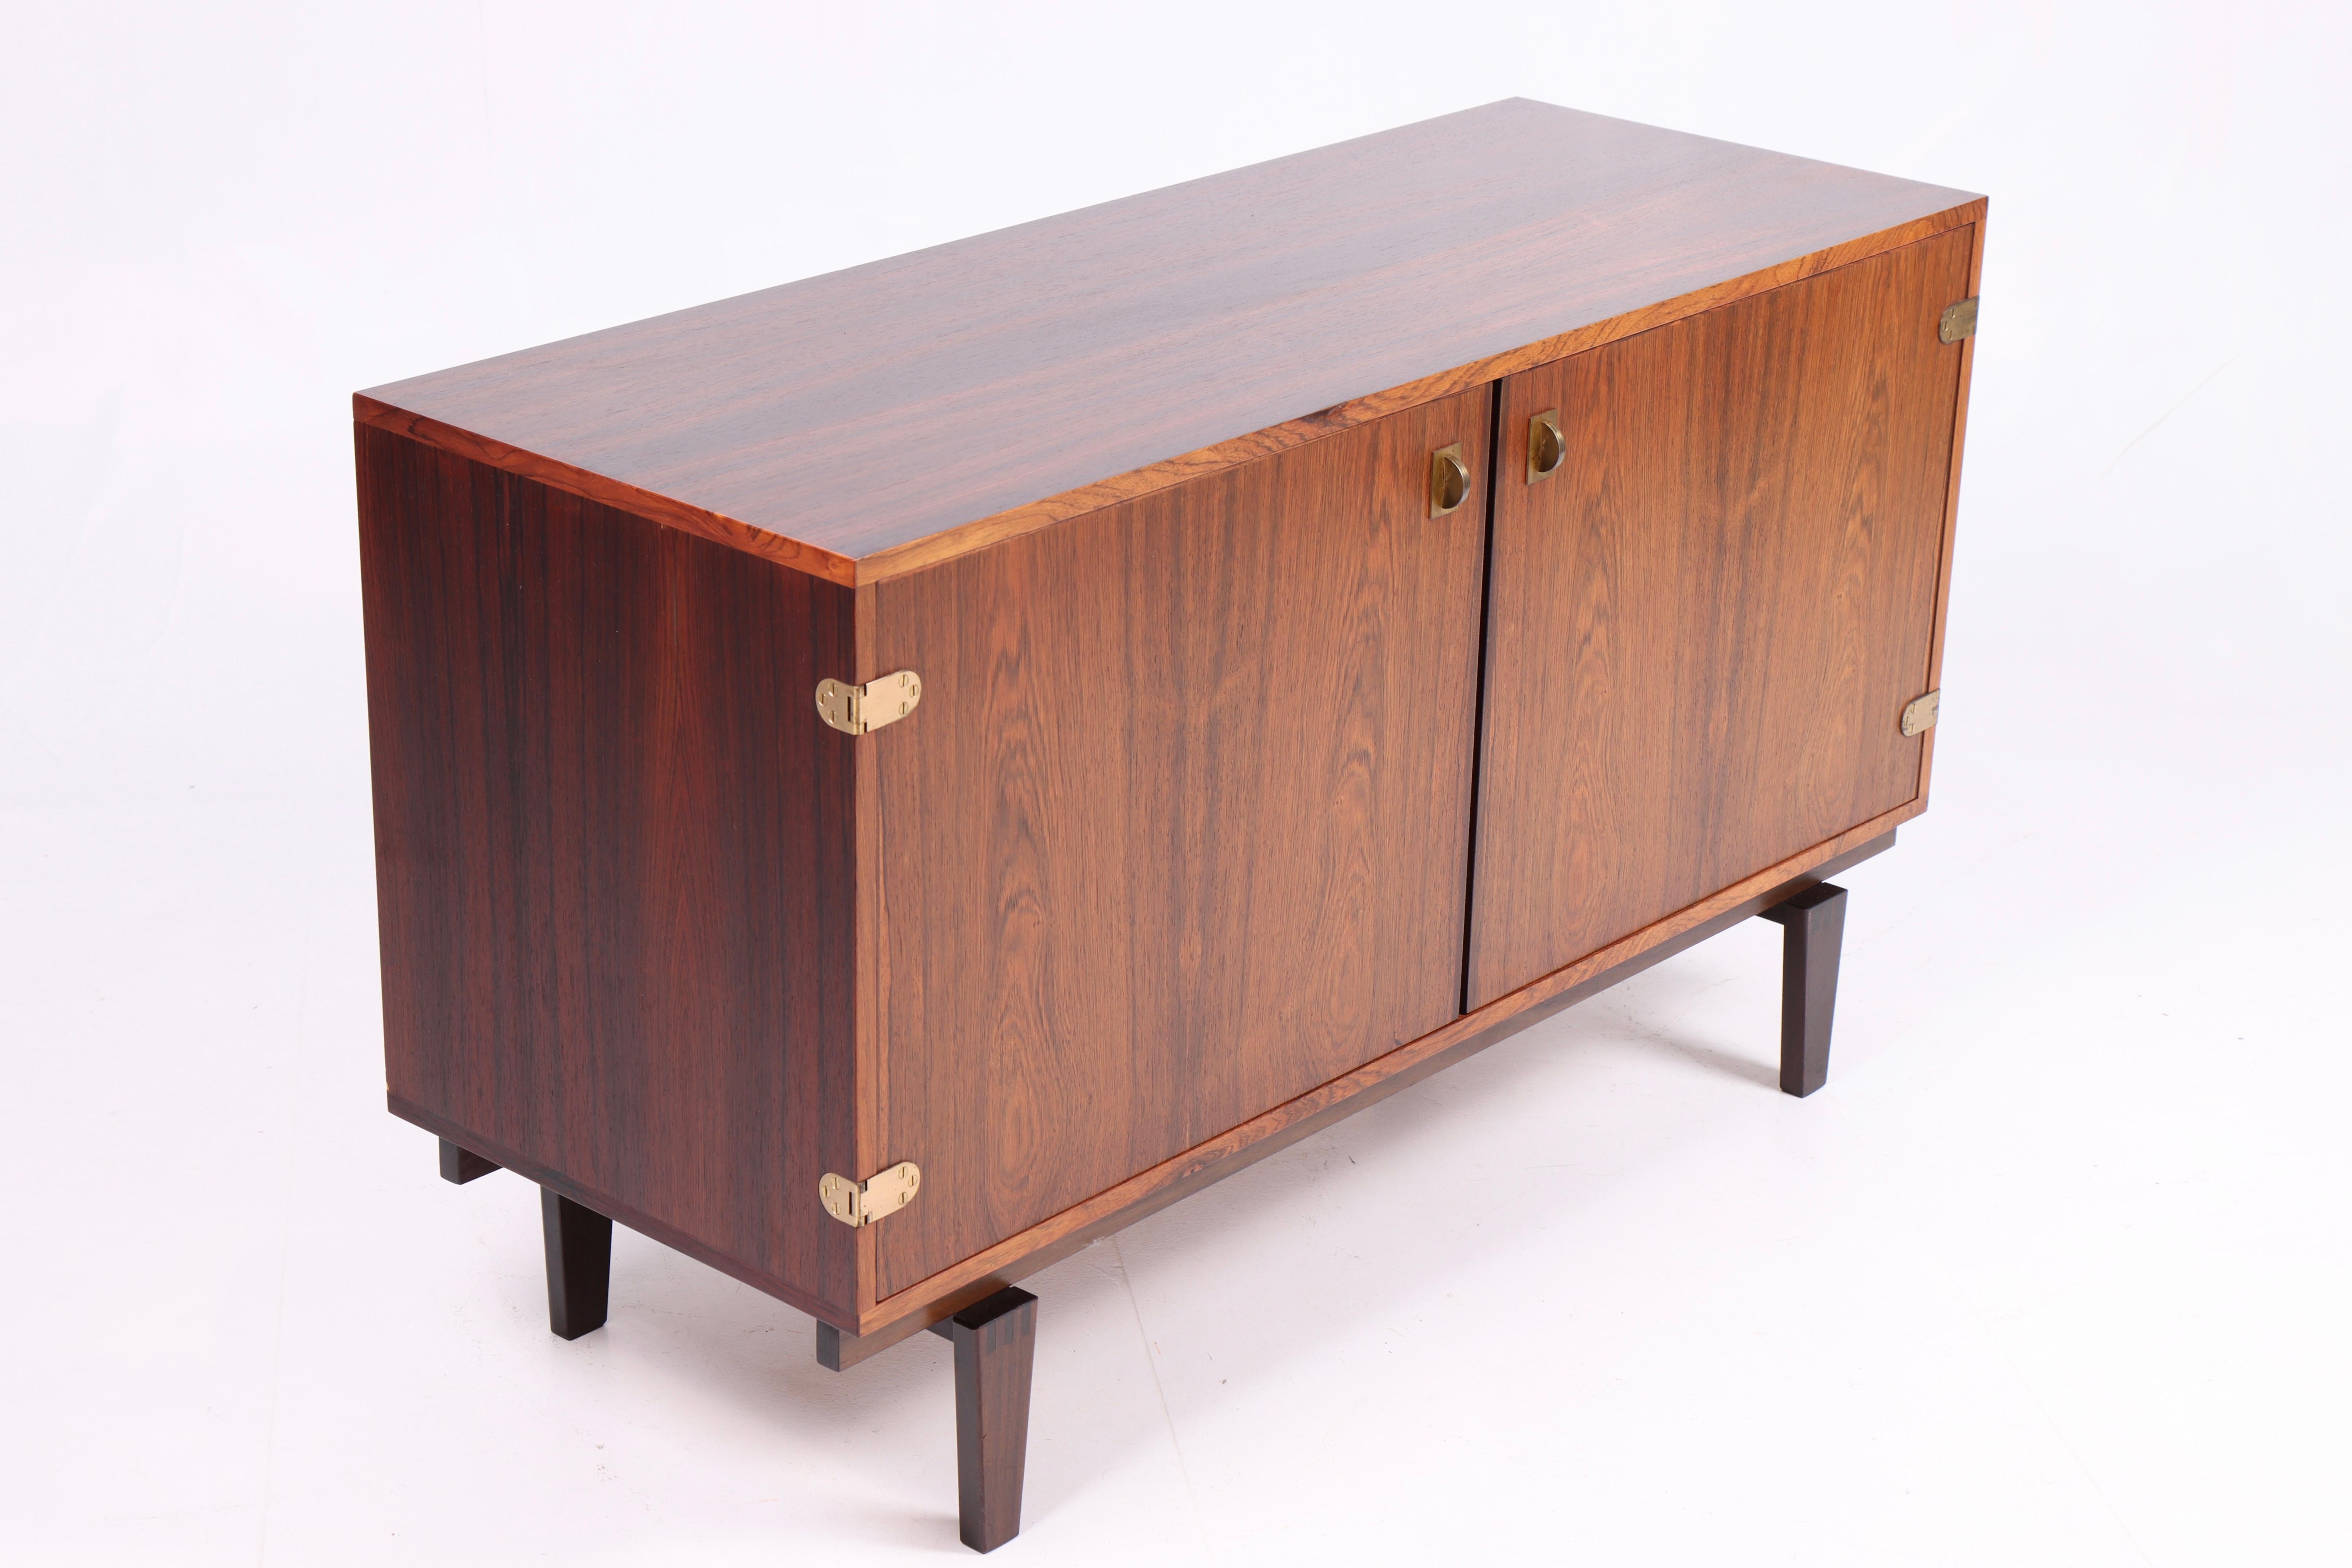 Mid-20th Century Midcentury Low Cabinet in Rosewood with Brass Hardware by Løgvig, Denmark, 1960s For Sale